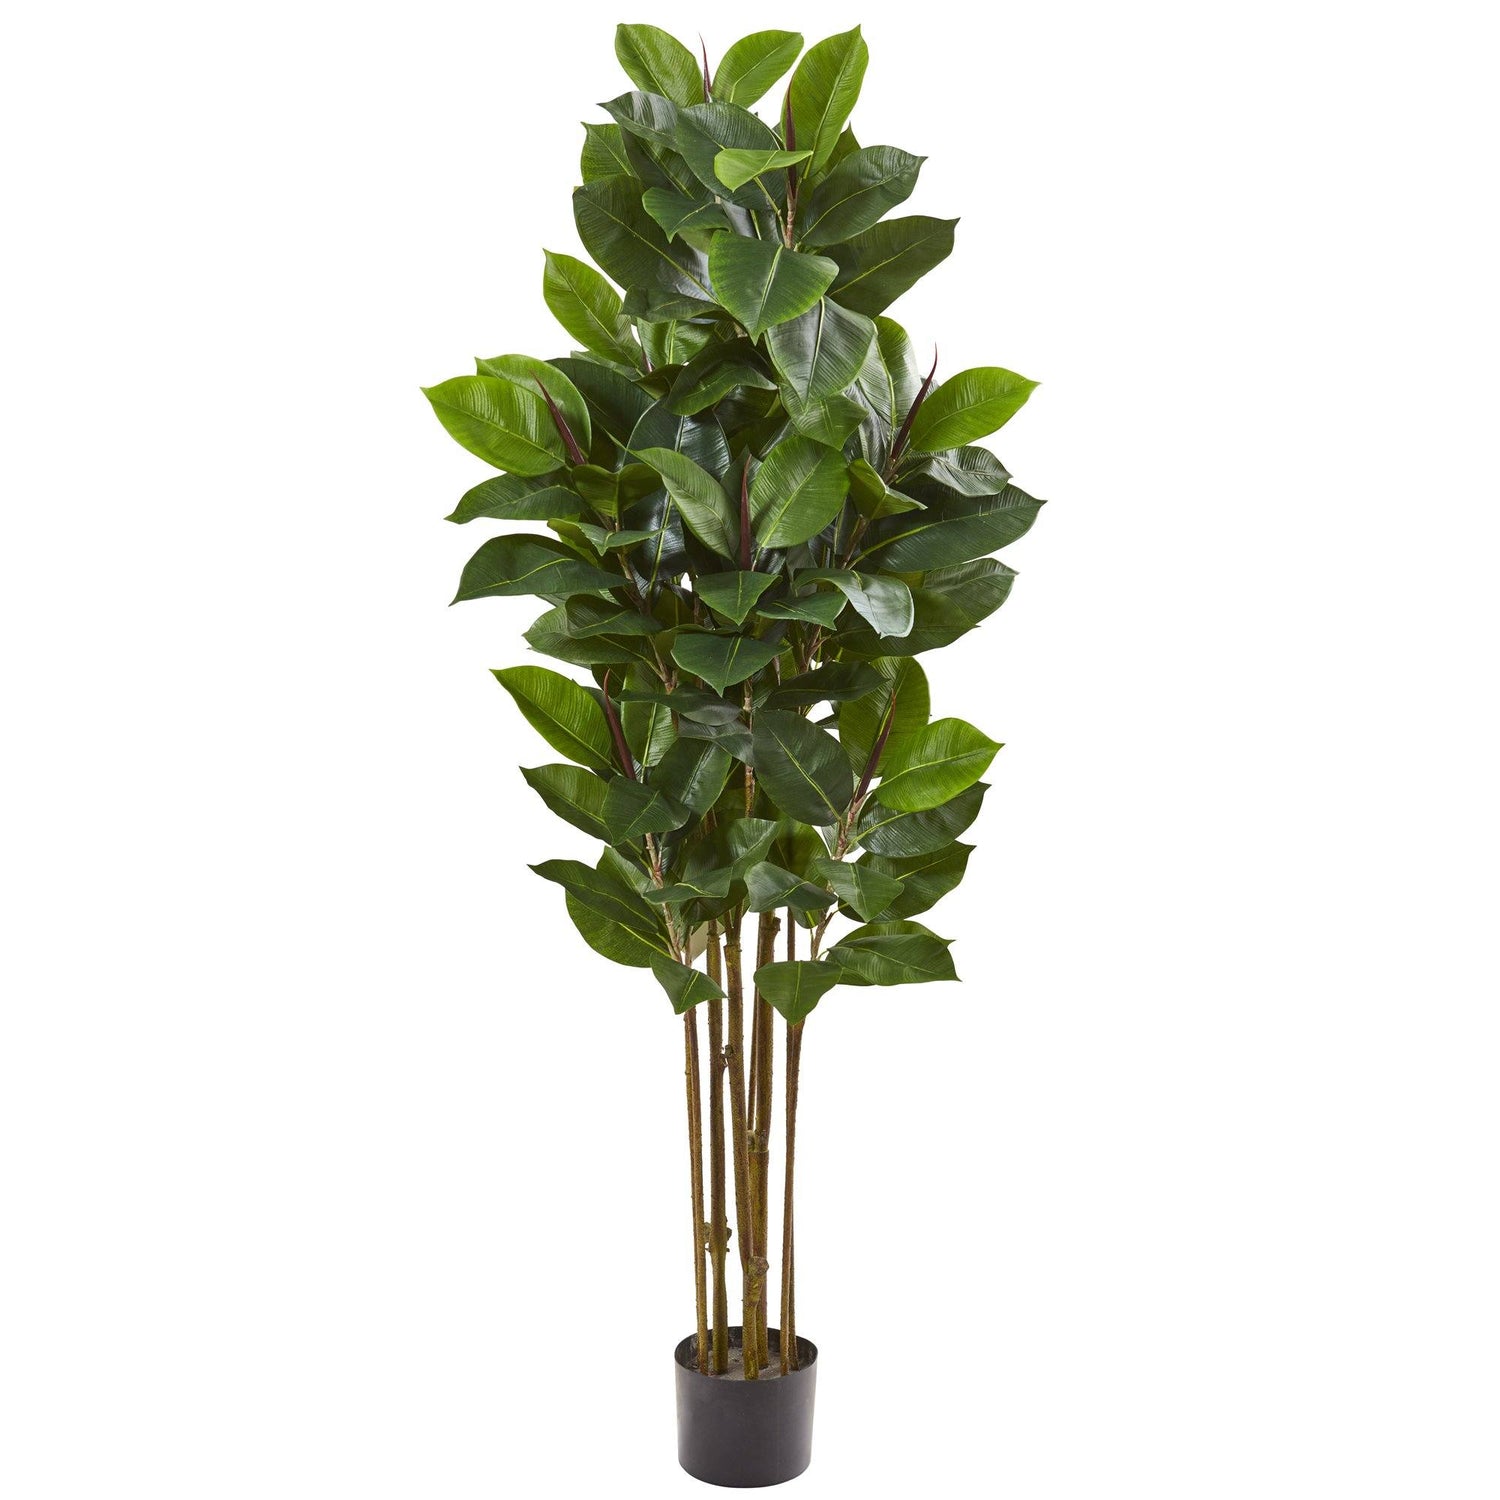 58” Rubber Leaf Artificial Tree